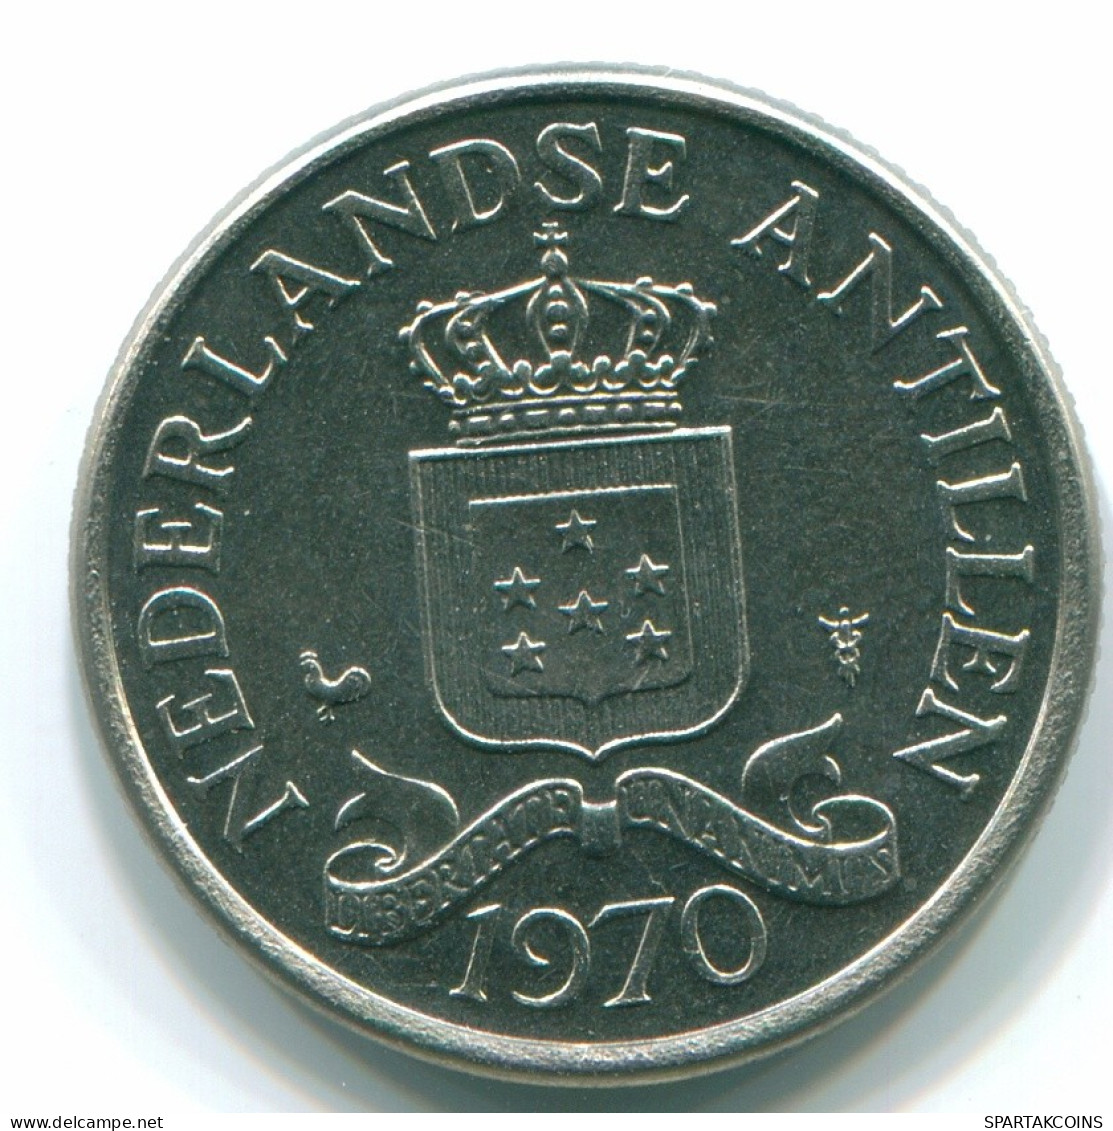 25 CENTS 1970 NETHERLANDS ANTILLES Nickel Colonial Coin #S11430.U.A - Antille Olandesi